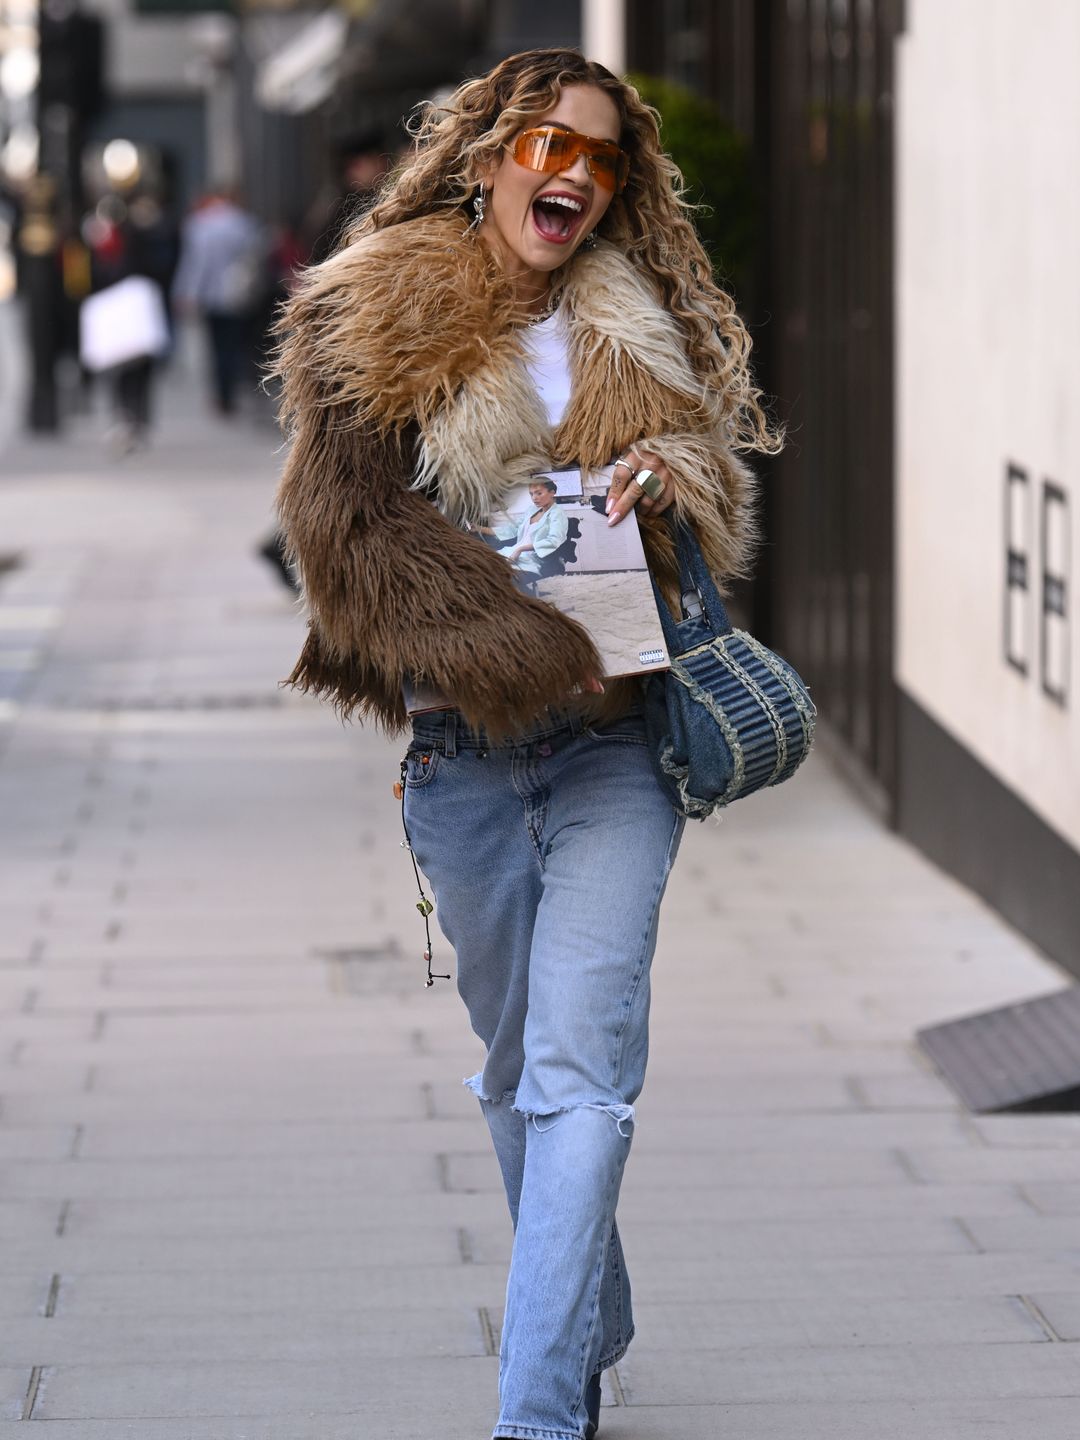 Rita is all smiles as she struts down the streets of London in an effortlessly cool outfit 